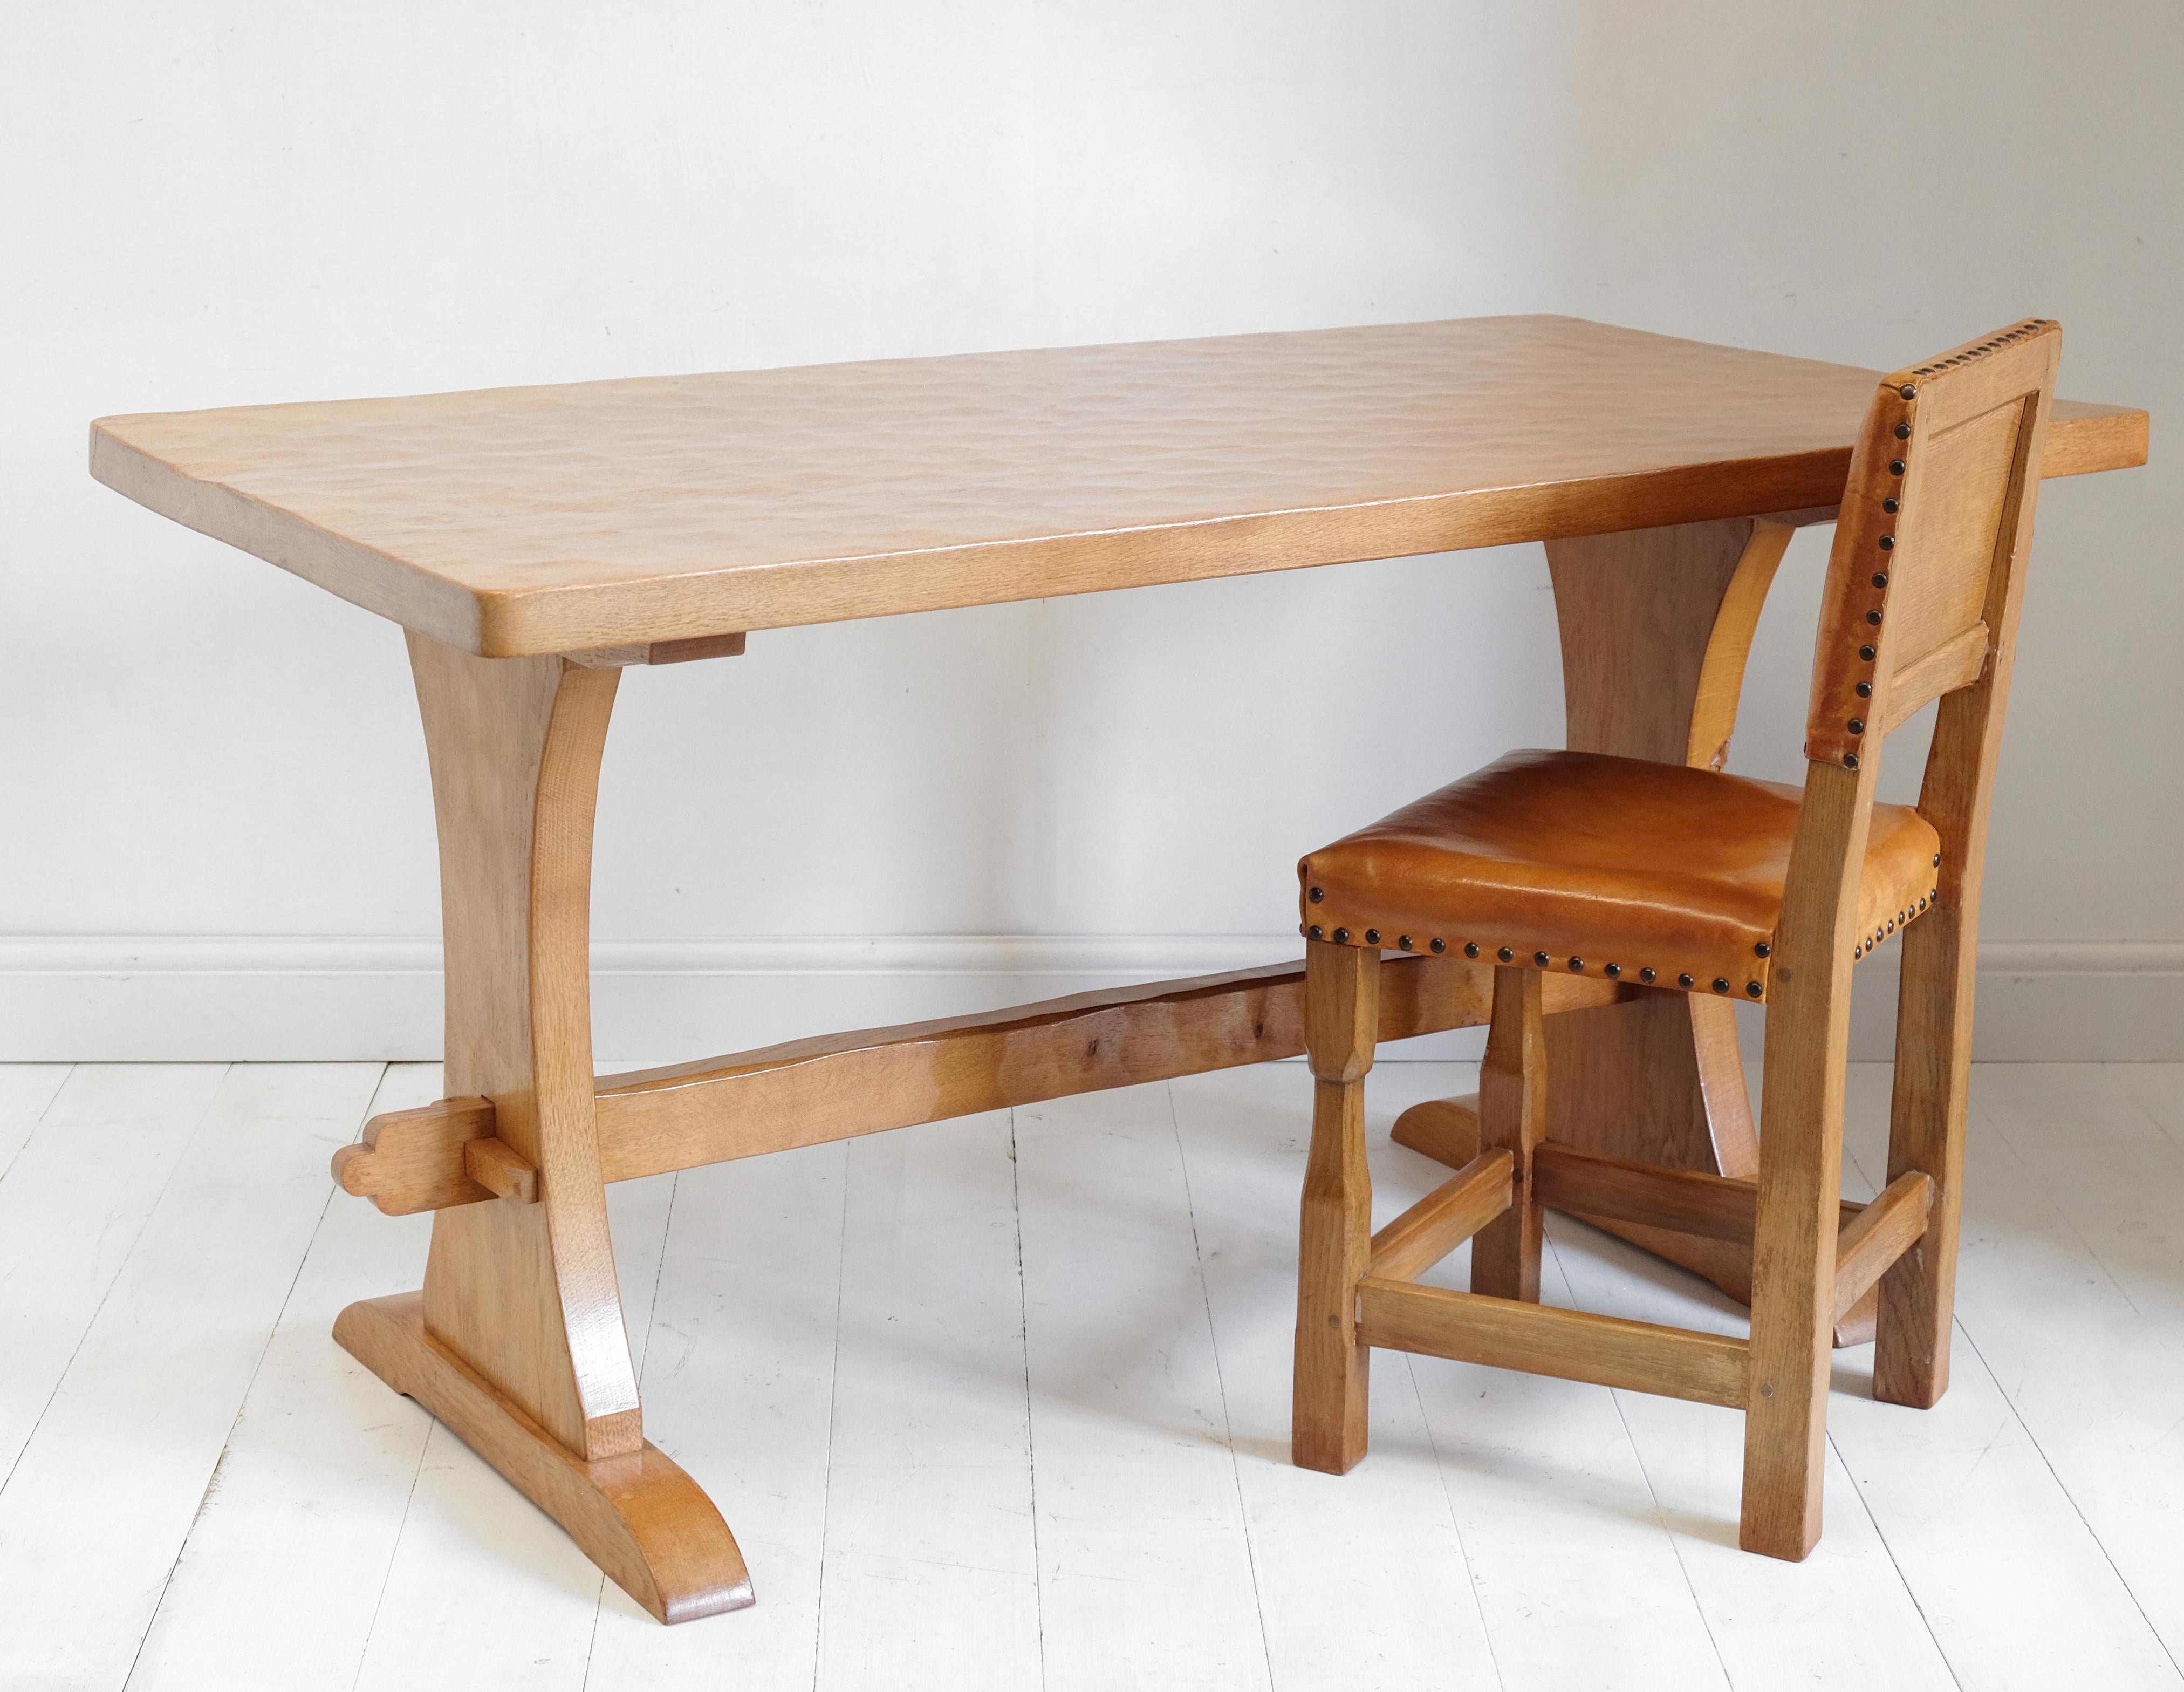 A complete dining set in solid oak by Thomas Whittaker of Littlebeck, aka Gnomeman. The set features a trestle ended table, a rare bench with shaped backrest, two rare carvers and two dining chairs. The surfaces of the table and bench and the backs